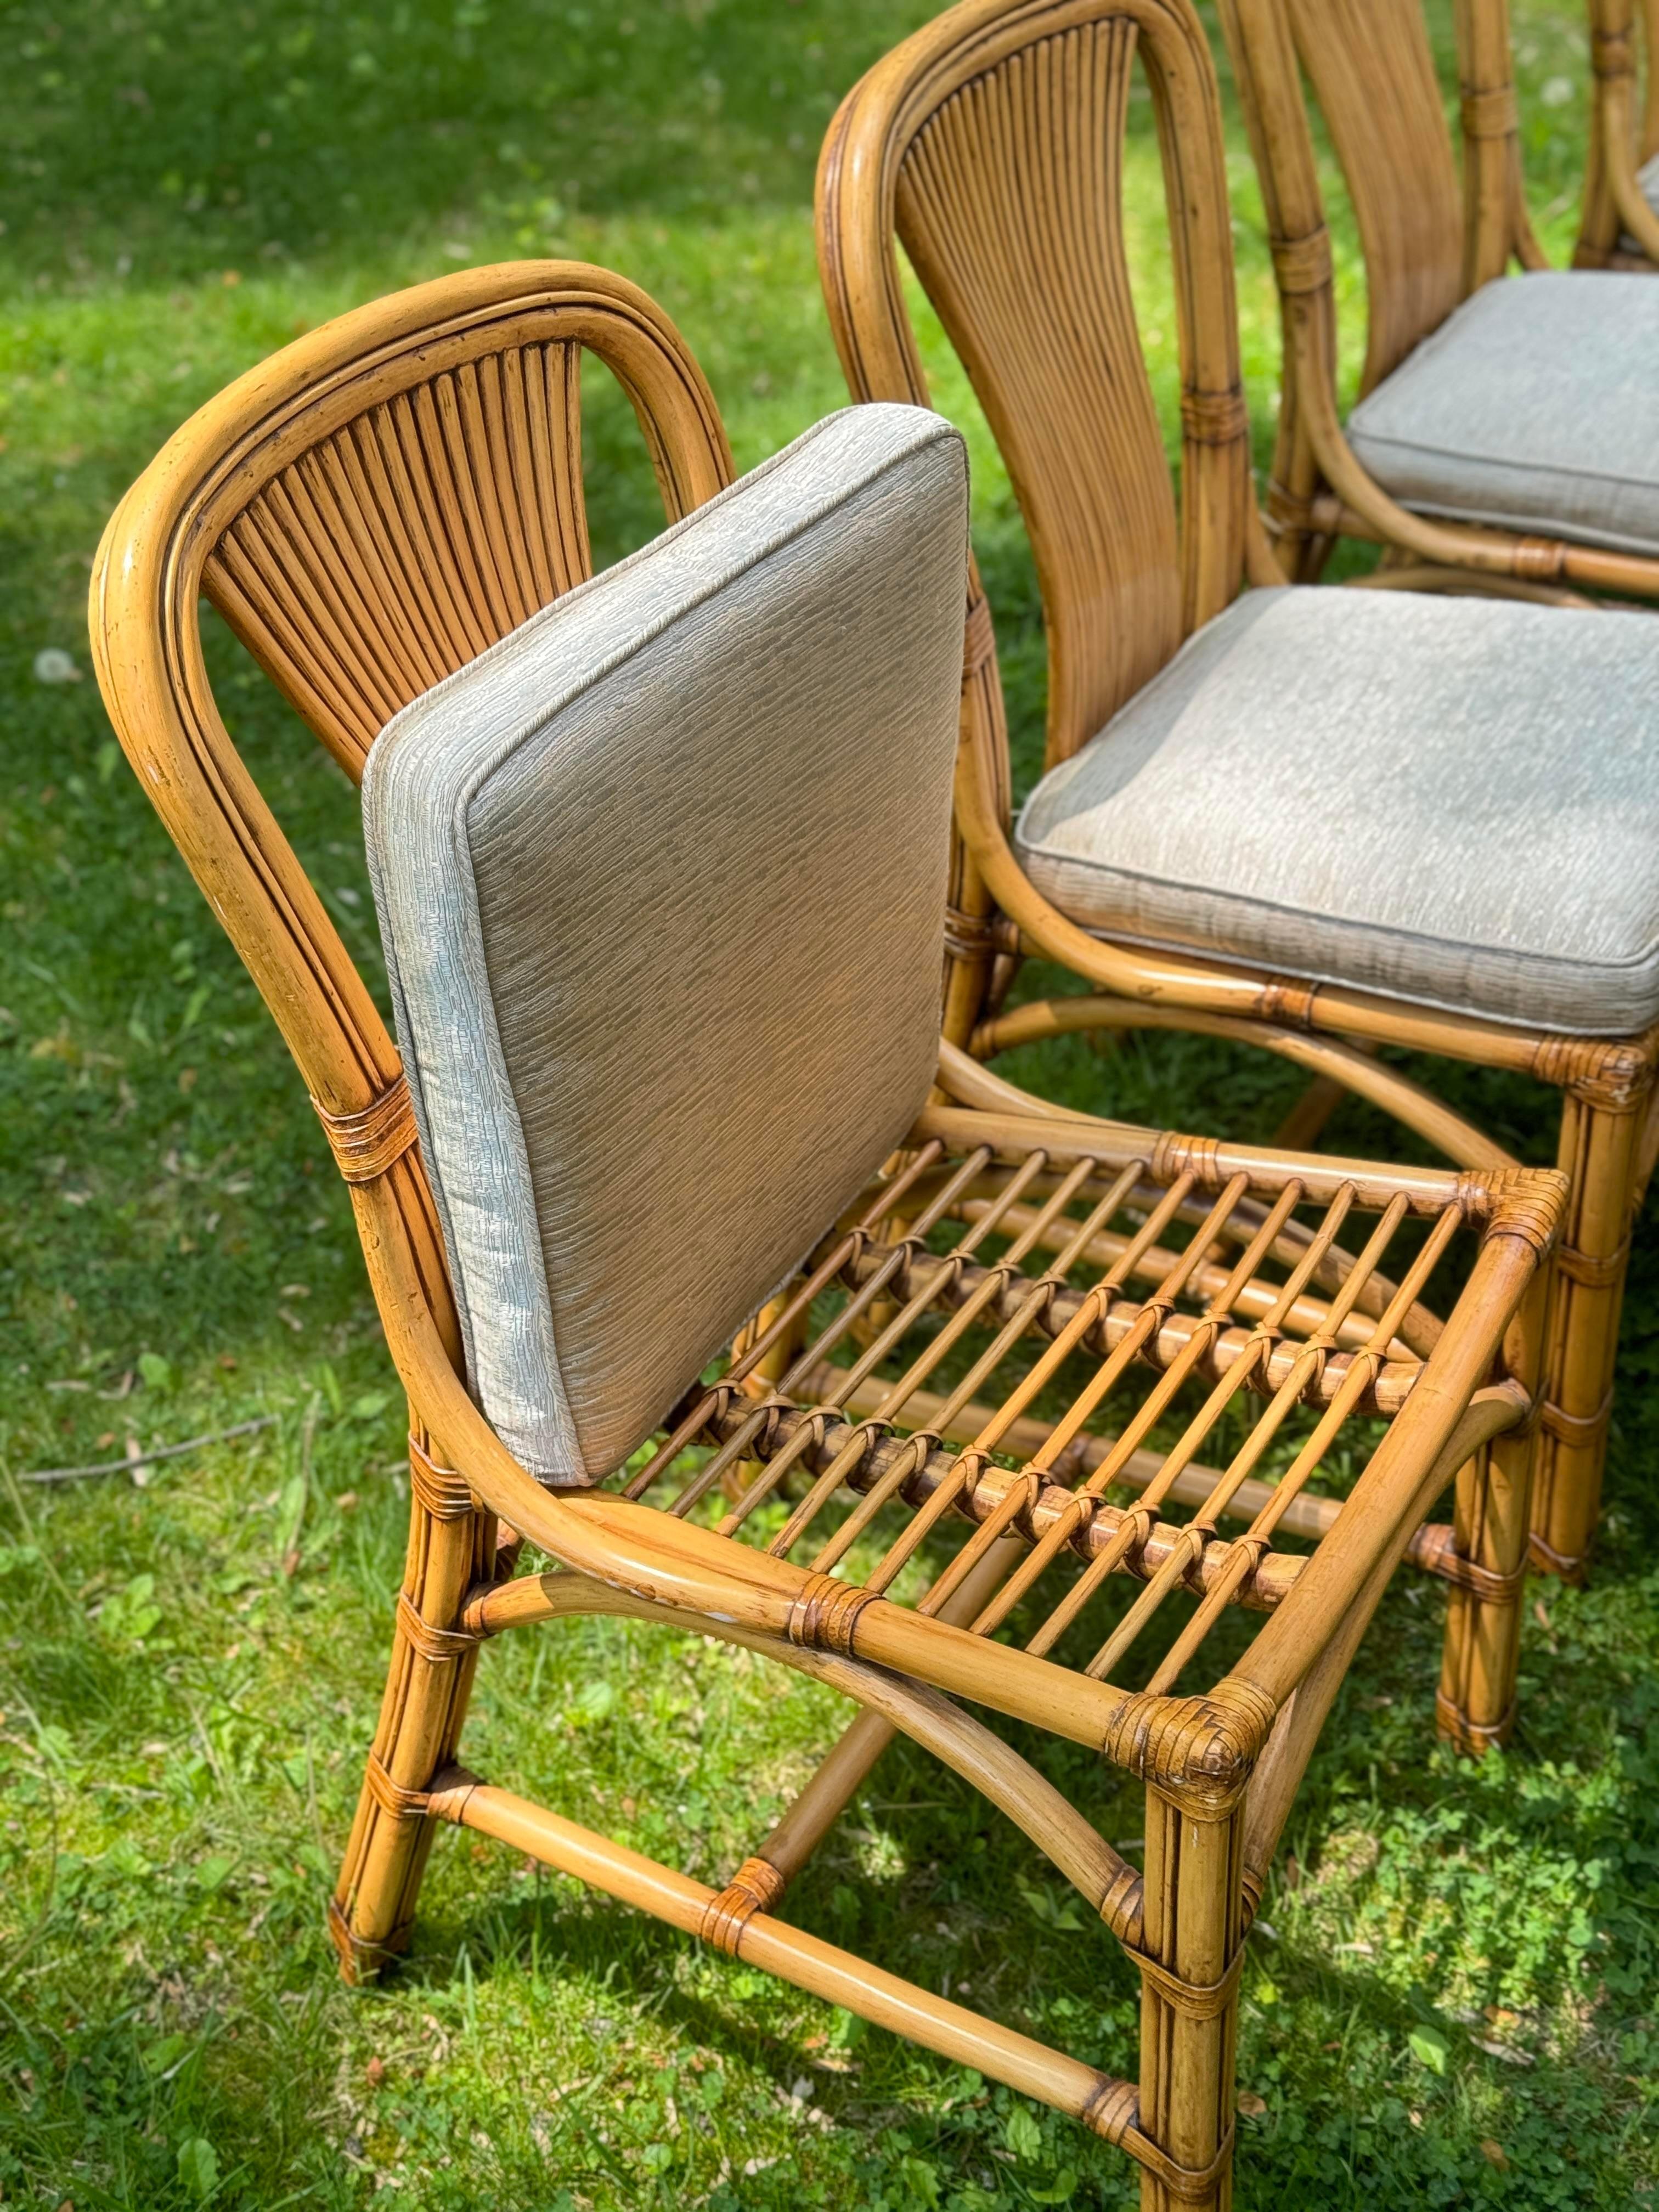 Palm Beach Regency Style Bamboo Dining Chairs With Curved Back - Set of 8 In Good Condition For Sale In Elkton, MD